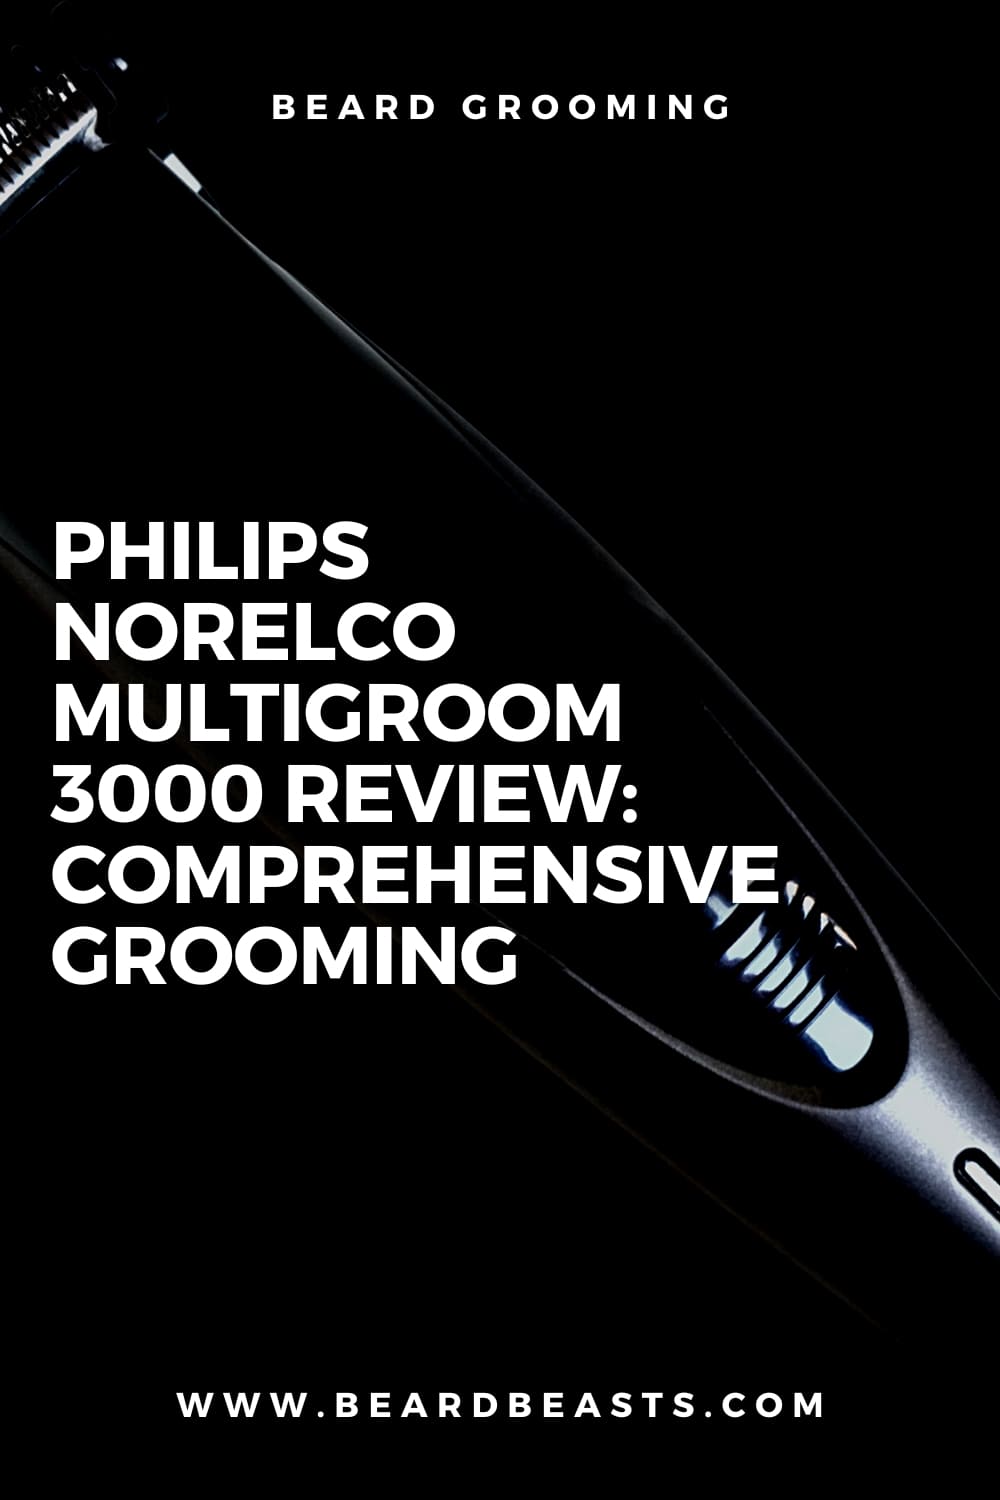 An image featuring a close-up of the Philips Norelco Multigroom 3000 against a dark background. The text overlay reads "BEARD GROOMING - PHILIPS NORELCO MULTIGROOM 3000 REVIEW: COMPREHENSIVE GROOMING - WWW.BEARDBEASTS.COM" in white, bold font, emphasizing the product's review focus.